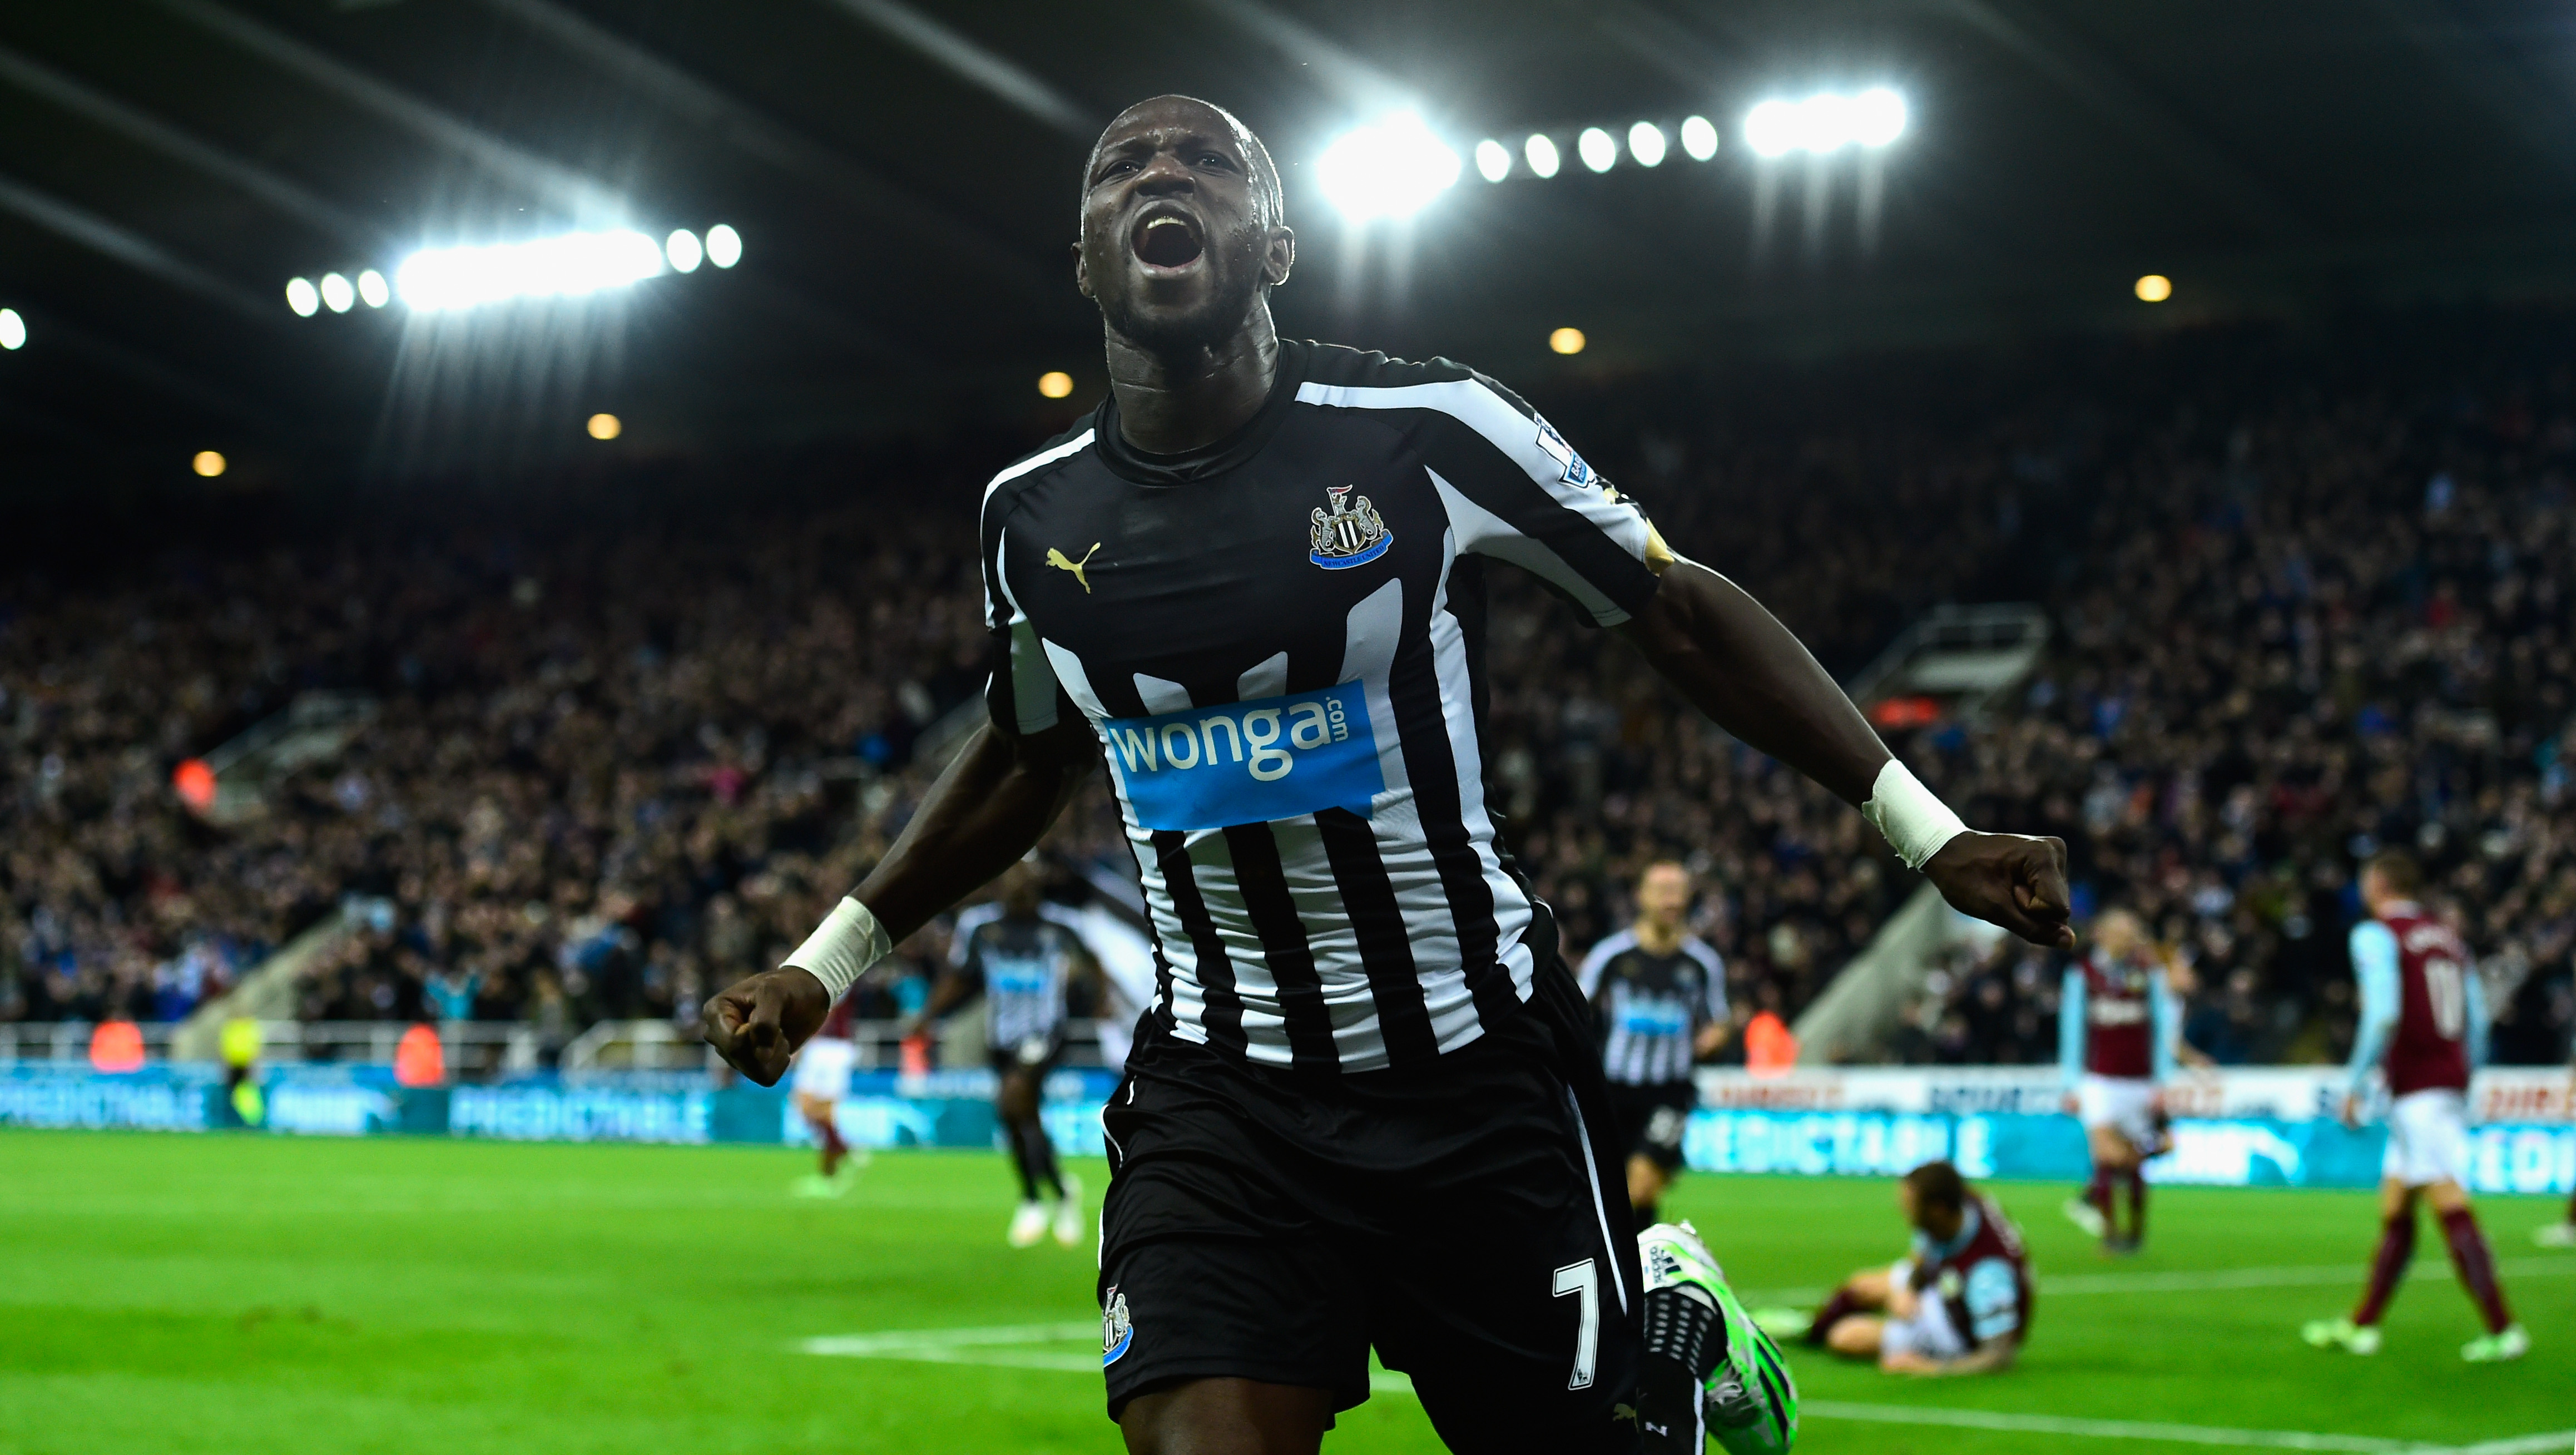 NEWCASTLE UPON TYNE, ENGLAND - JANUARY 01: Newcastle United player Moussa Sissoko celebrates after scoring their third goal during the Barclays Premier League match between Newcastle United and Burnley at St James' Park on January 1, 2015 in Newcastle upon Tyne, England. (Photo by Stu Forster/Getty Images)